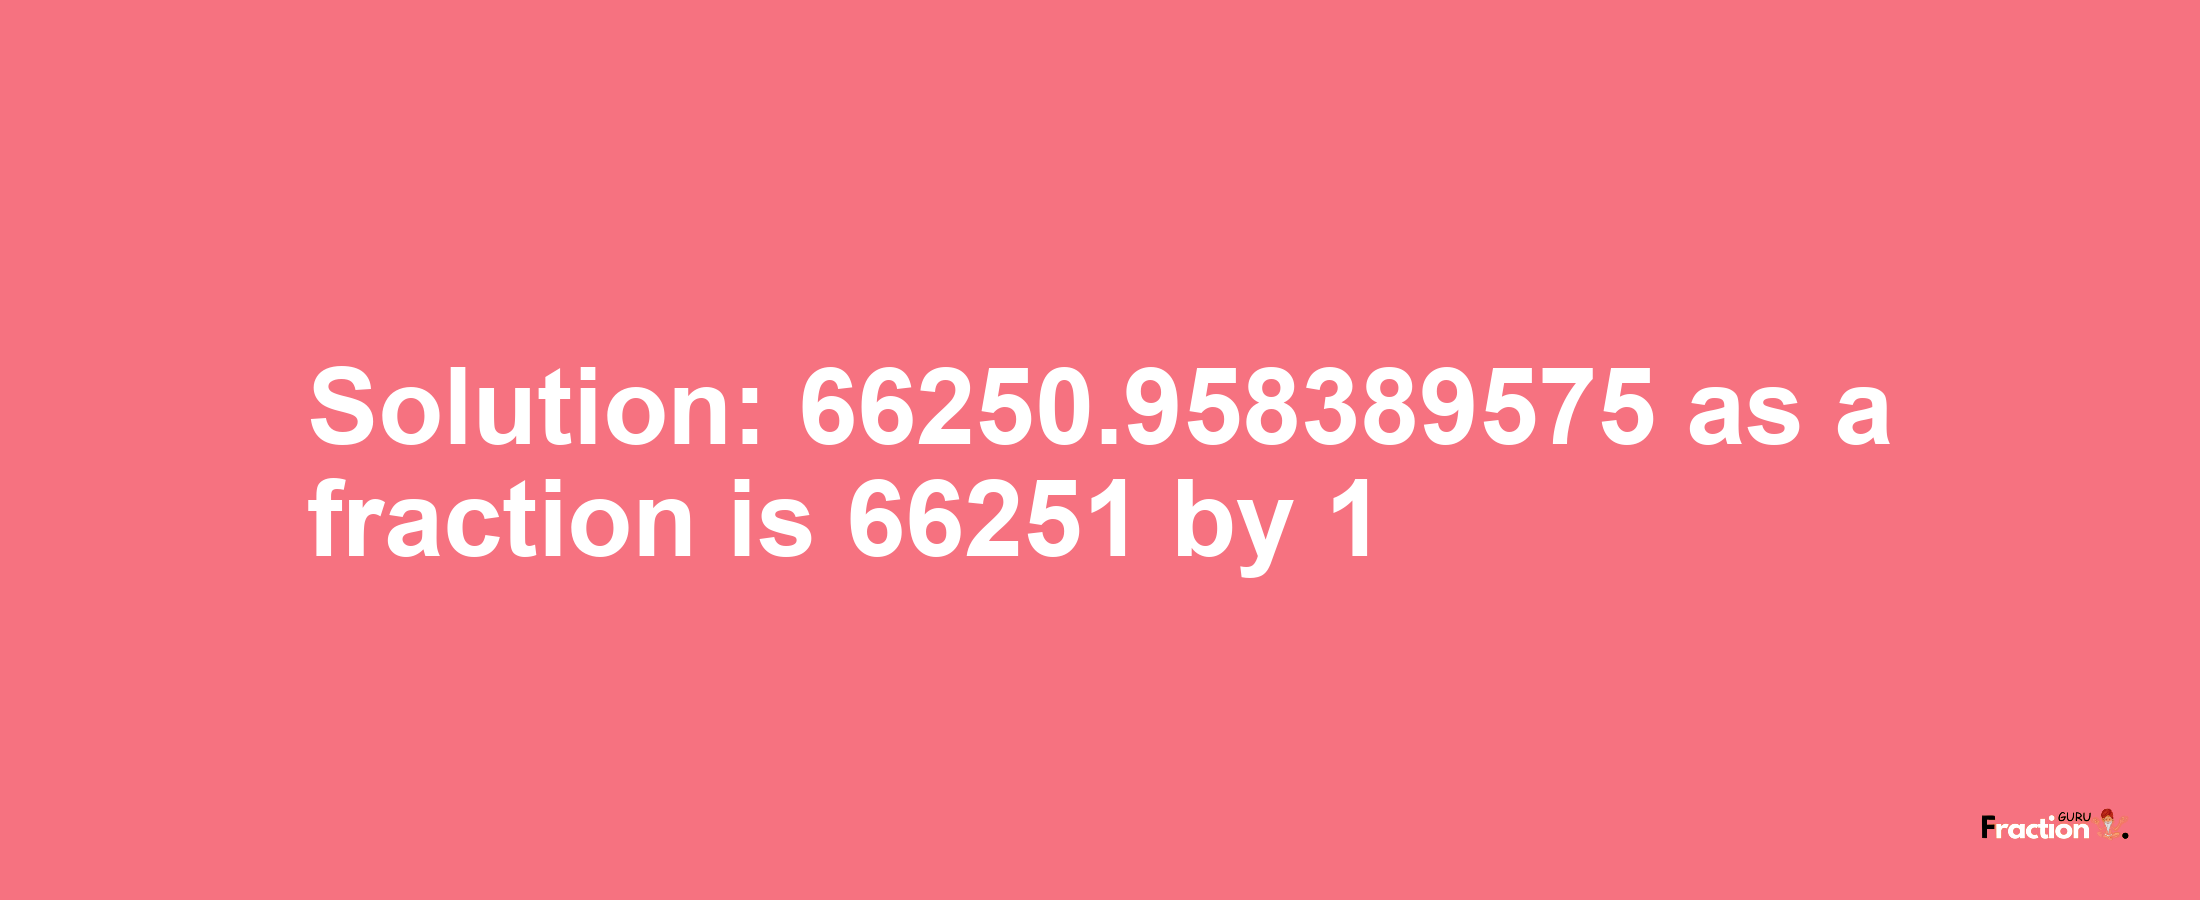 Solution:66250.958389575 as a fraction is 66251/1